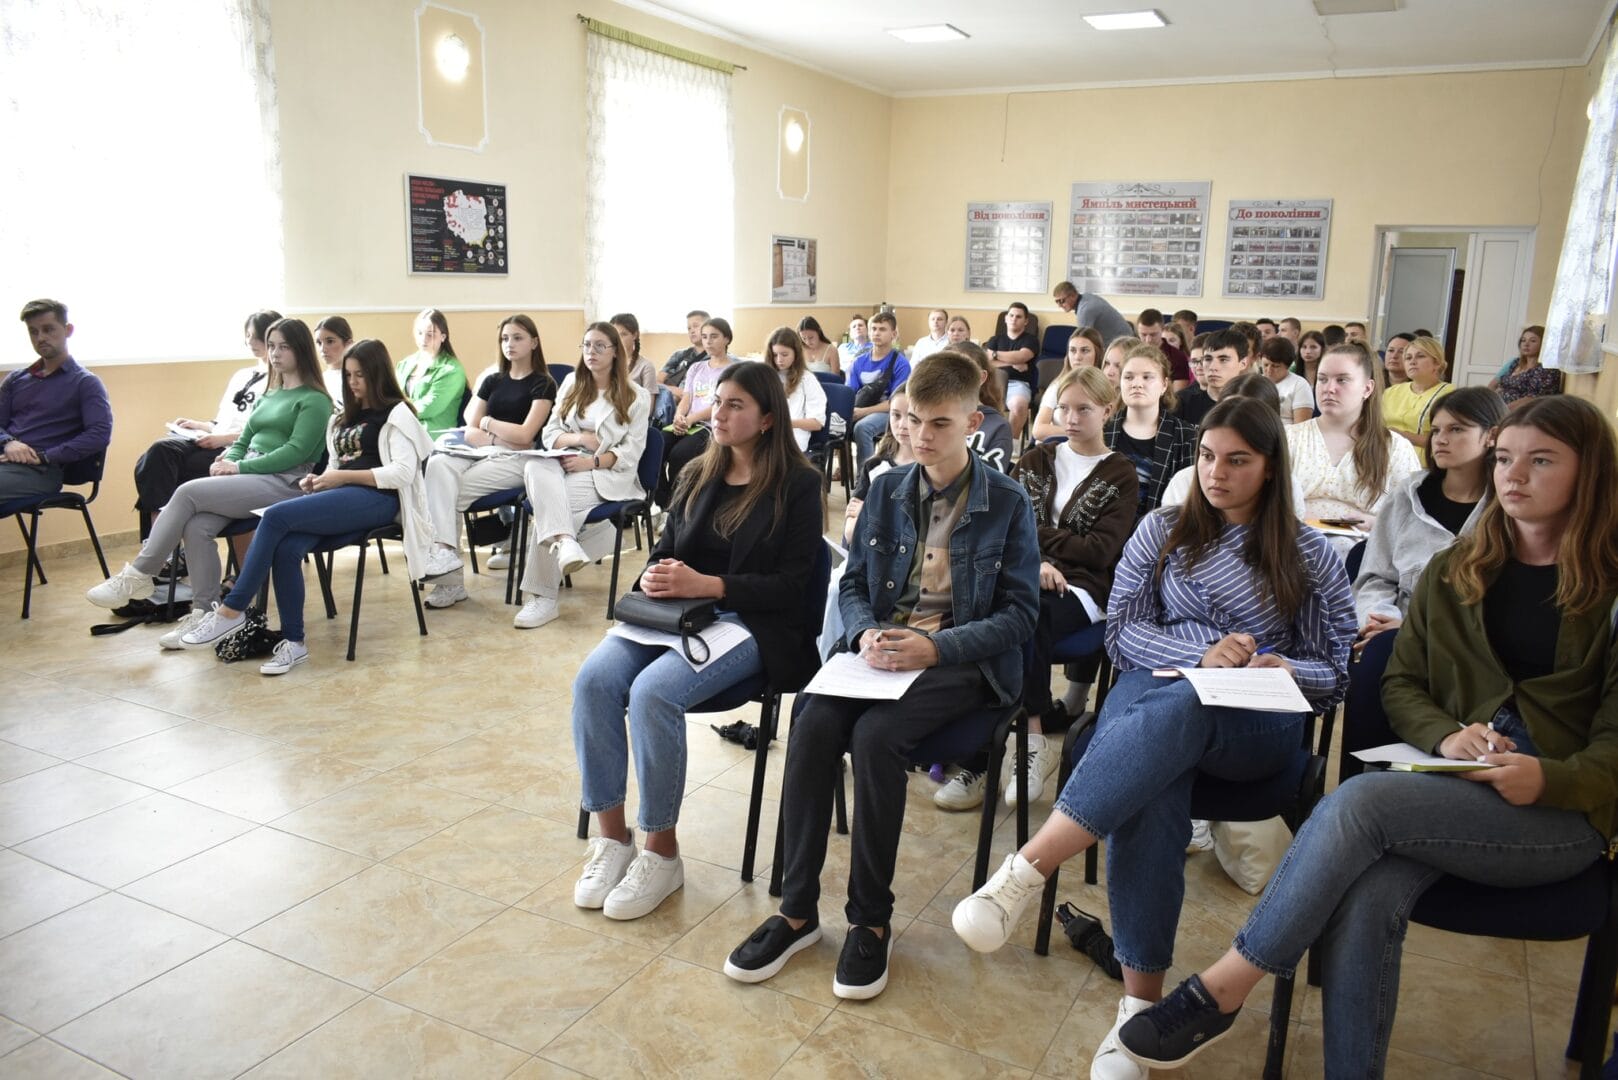  A conference held on the Youth Day in the Murovane Community